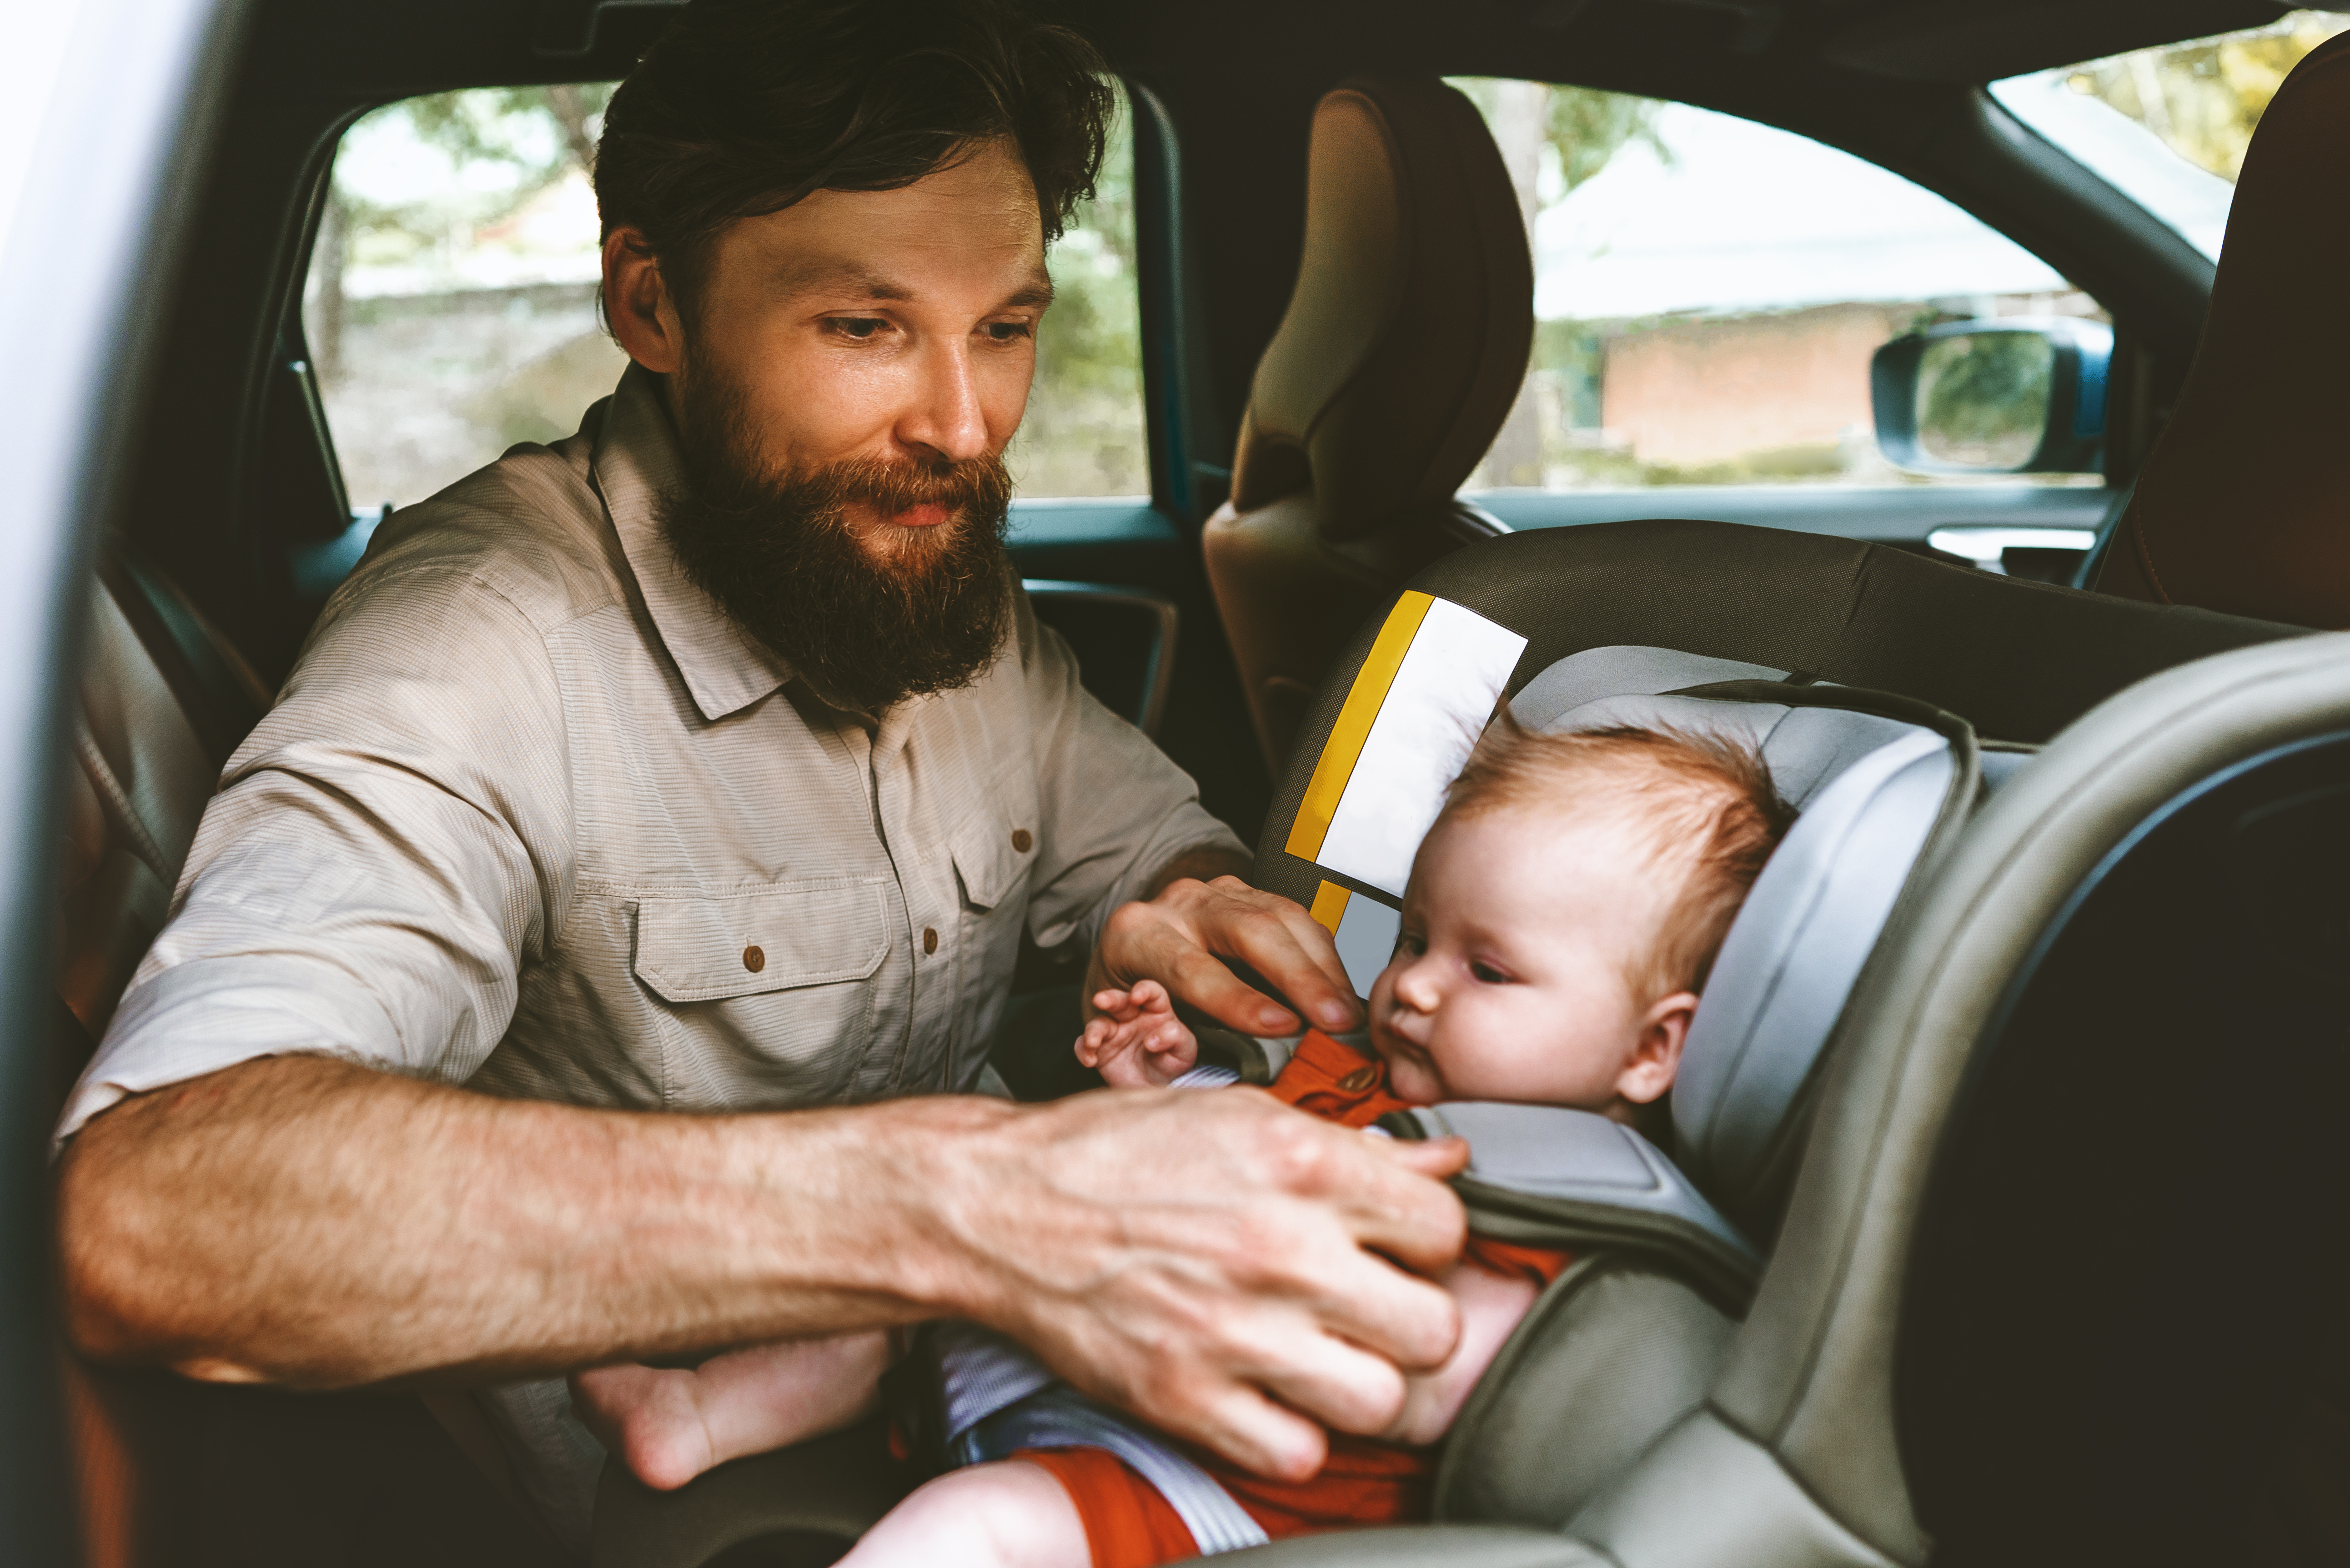 Father putting baby in safety car seat happy family vacation road trip lifestyle child care transportation rear-facing